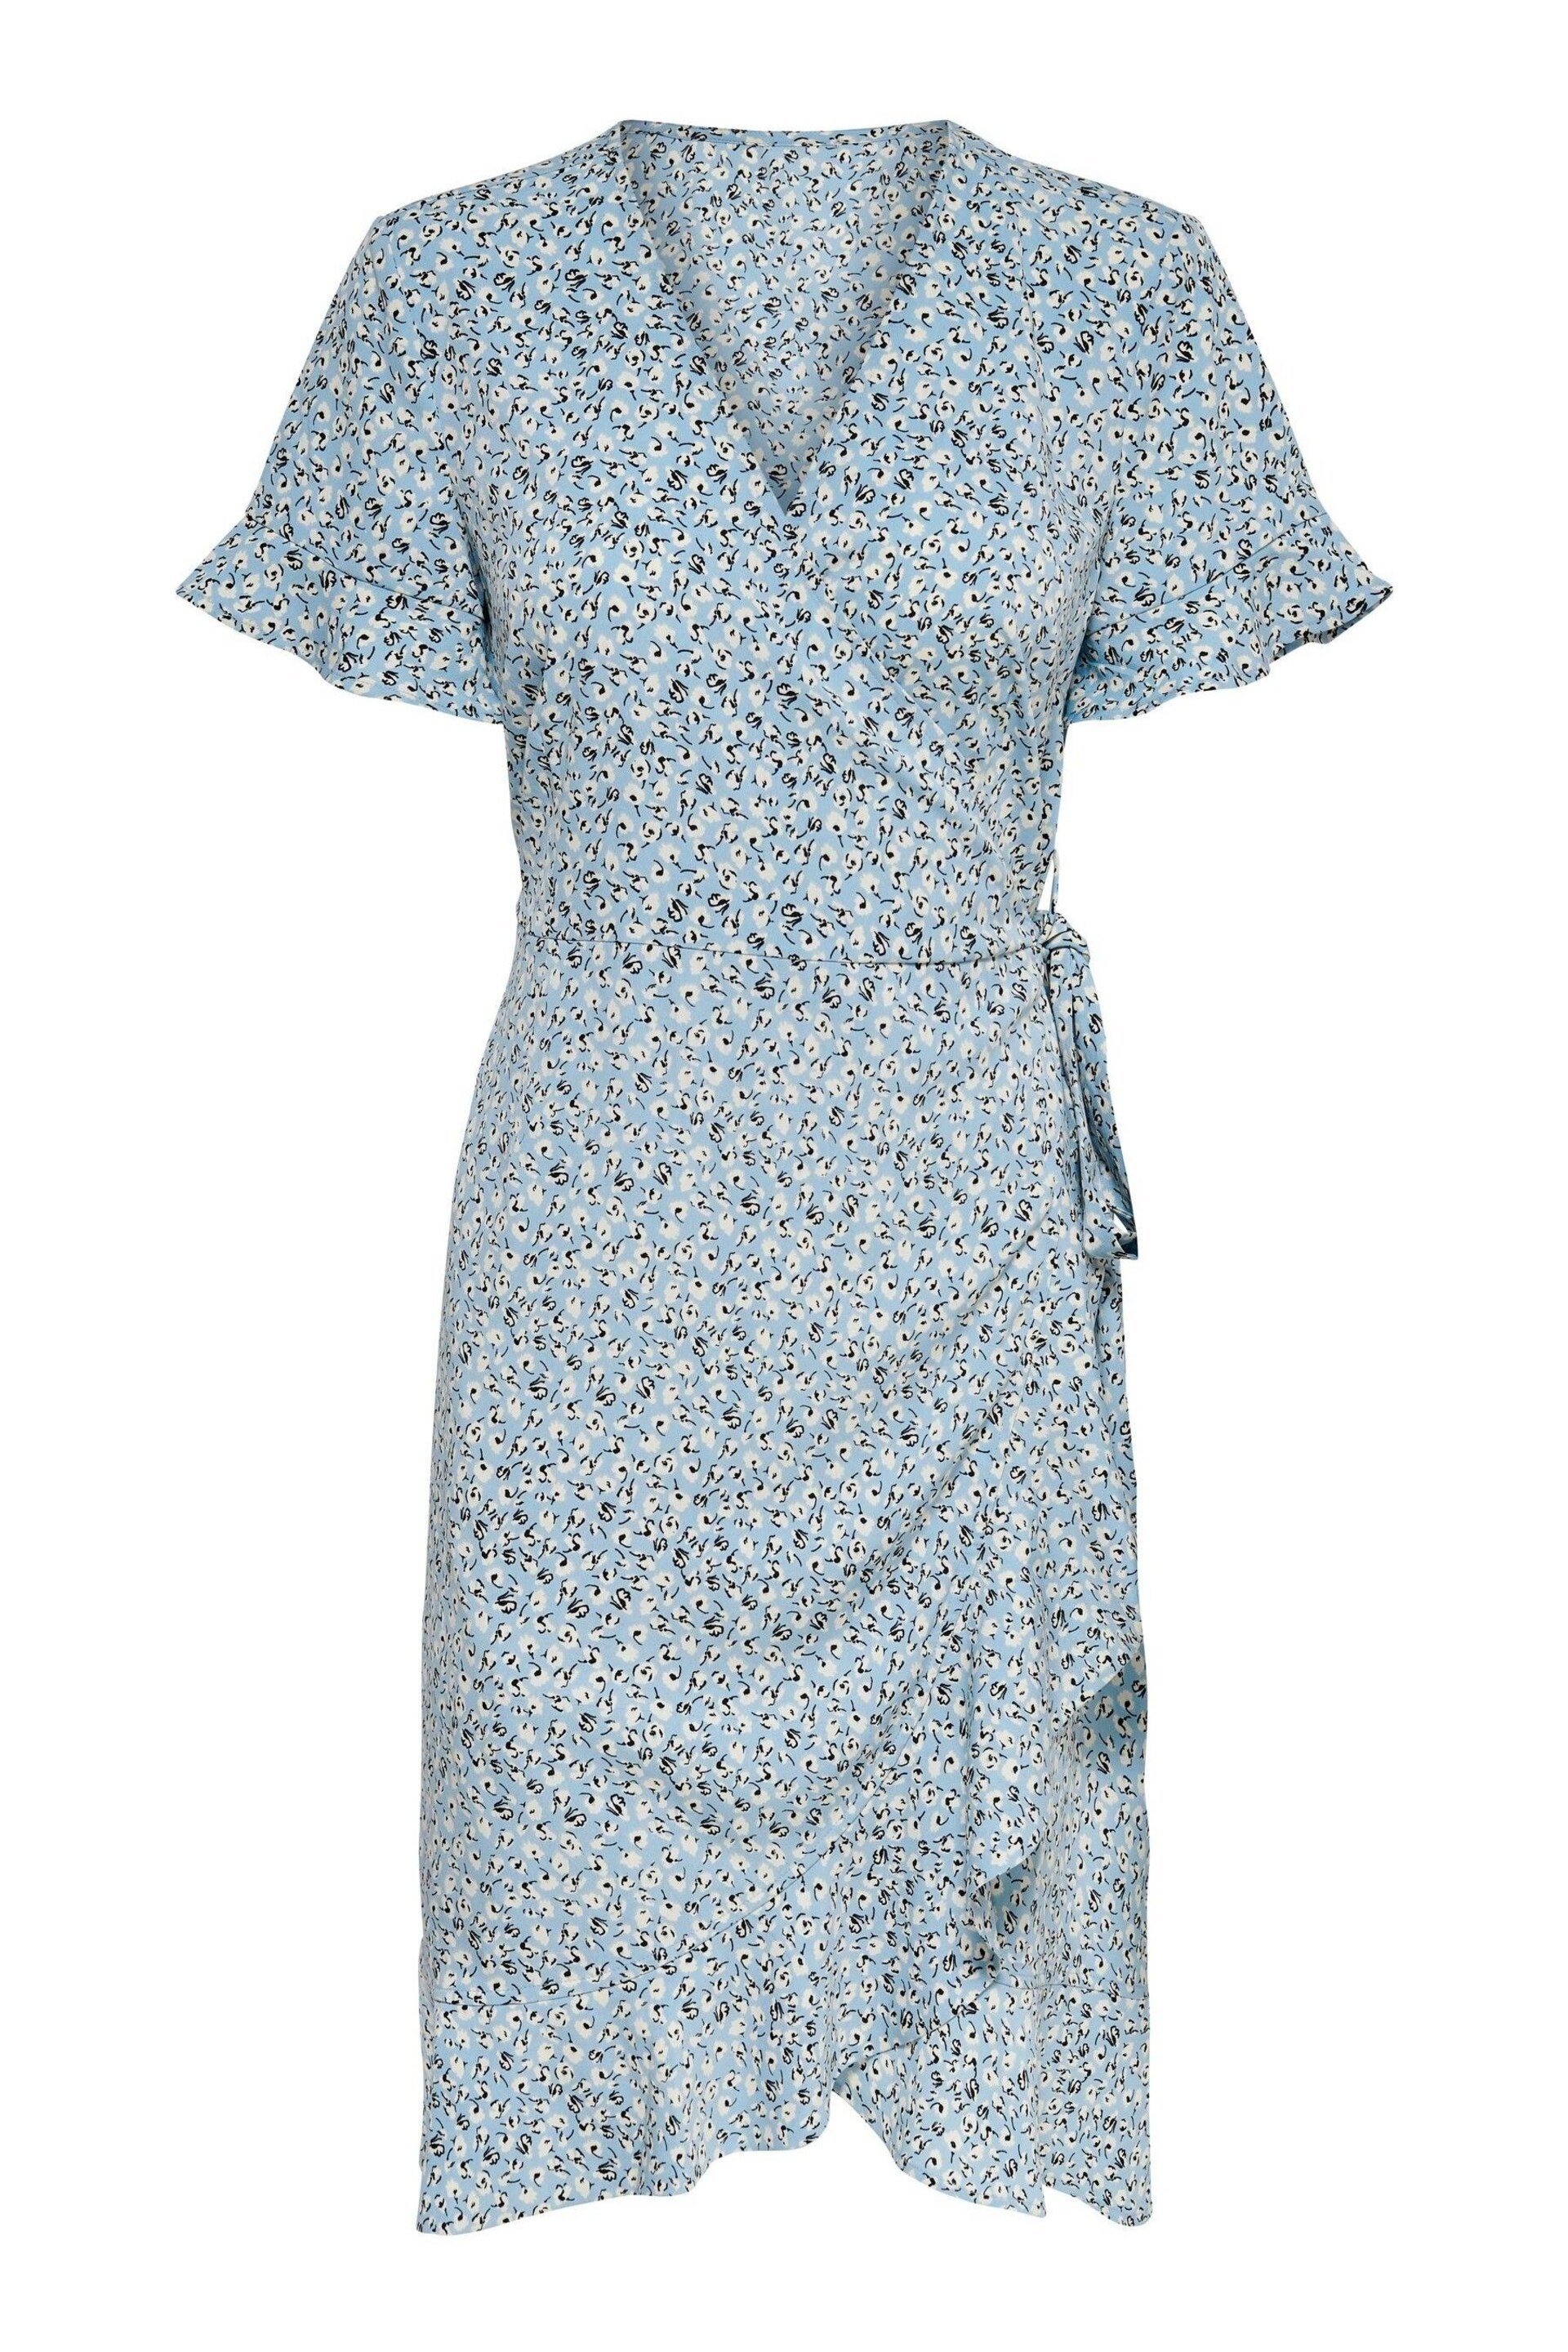 ONLY Blue Floral Short Sleeve Wrap Summer Midi Dress - Image 5 of 5